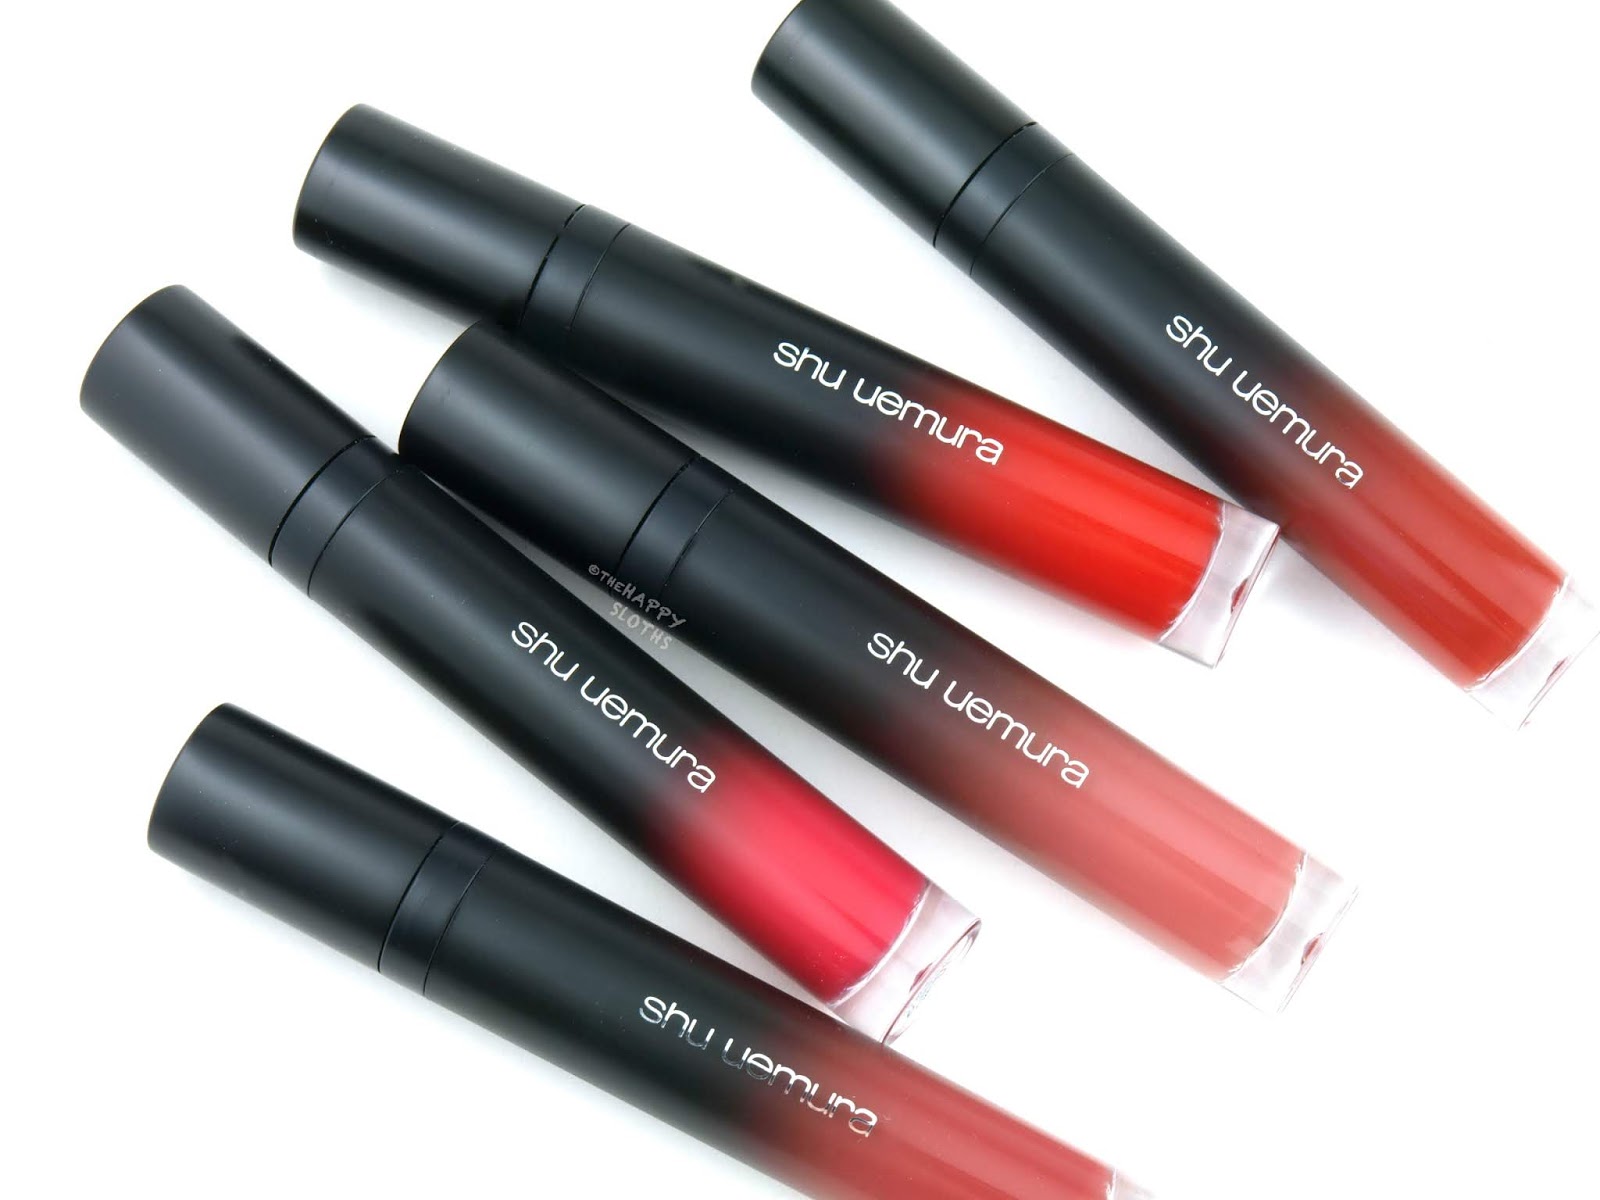 Shu Uemura | Matte Supreme Lip Color: Review and Swatches | The